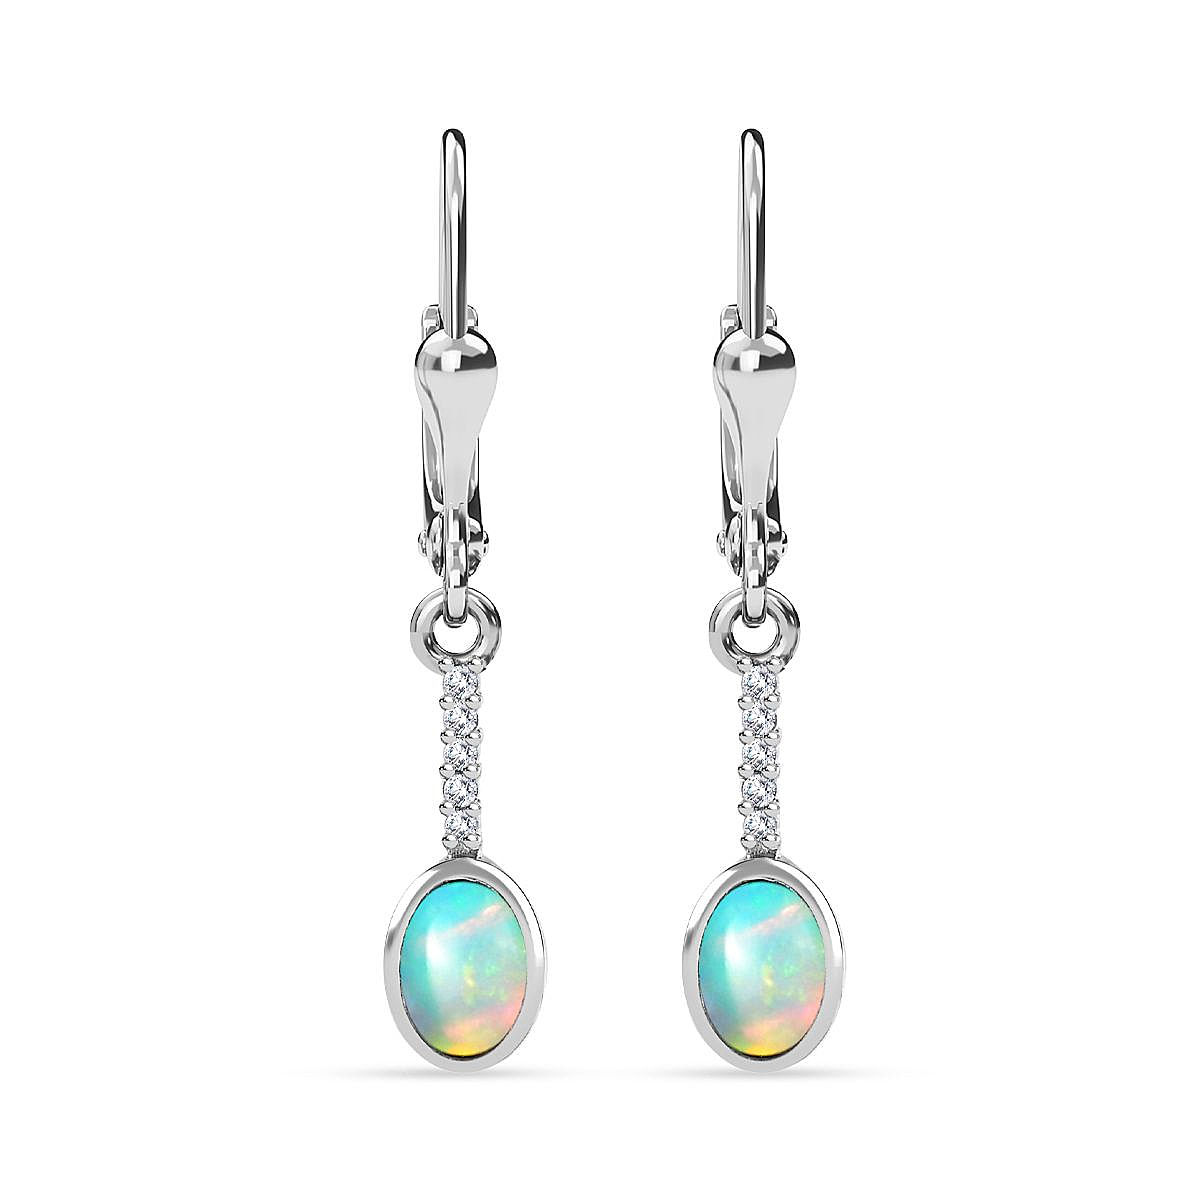 Opal ,  White Zircon  Solitaire Lever Back Earring in Platinum Overlay Sterling Silver 0.96 ct  0.688  Ct.